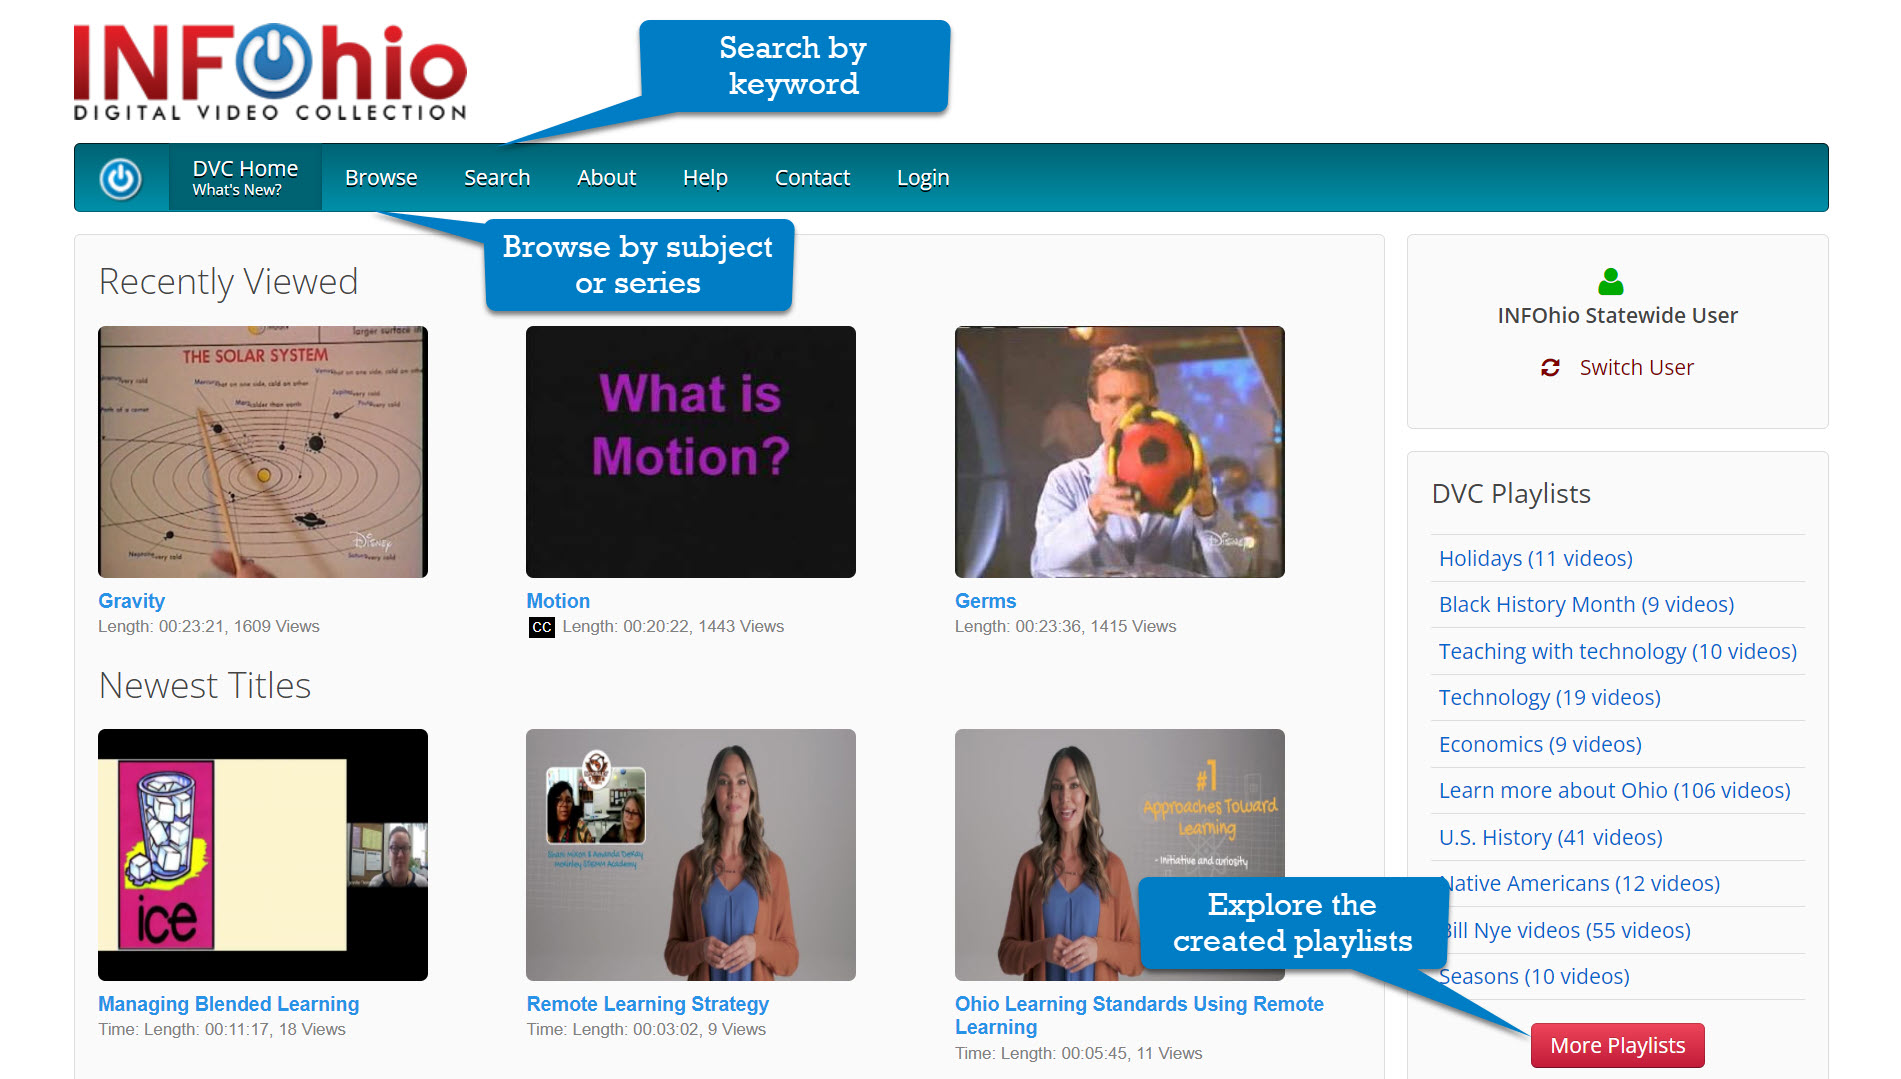 INFOhio's Digital Video Collection home page